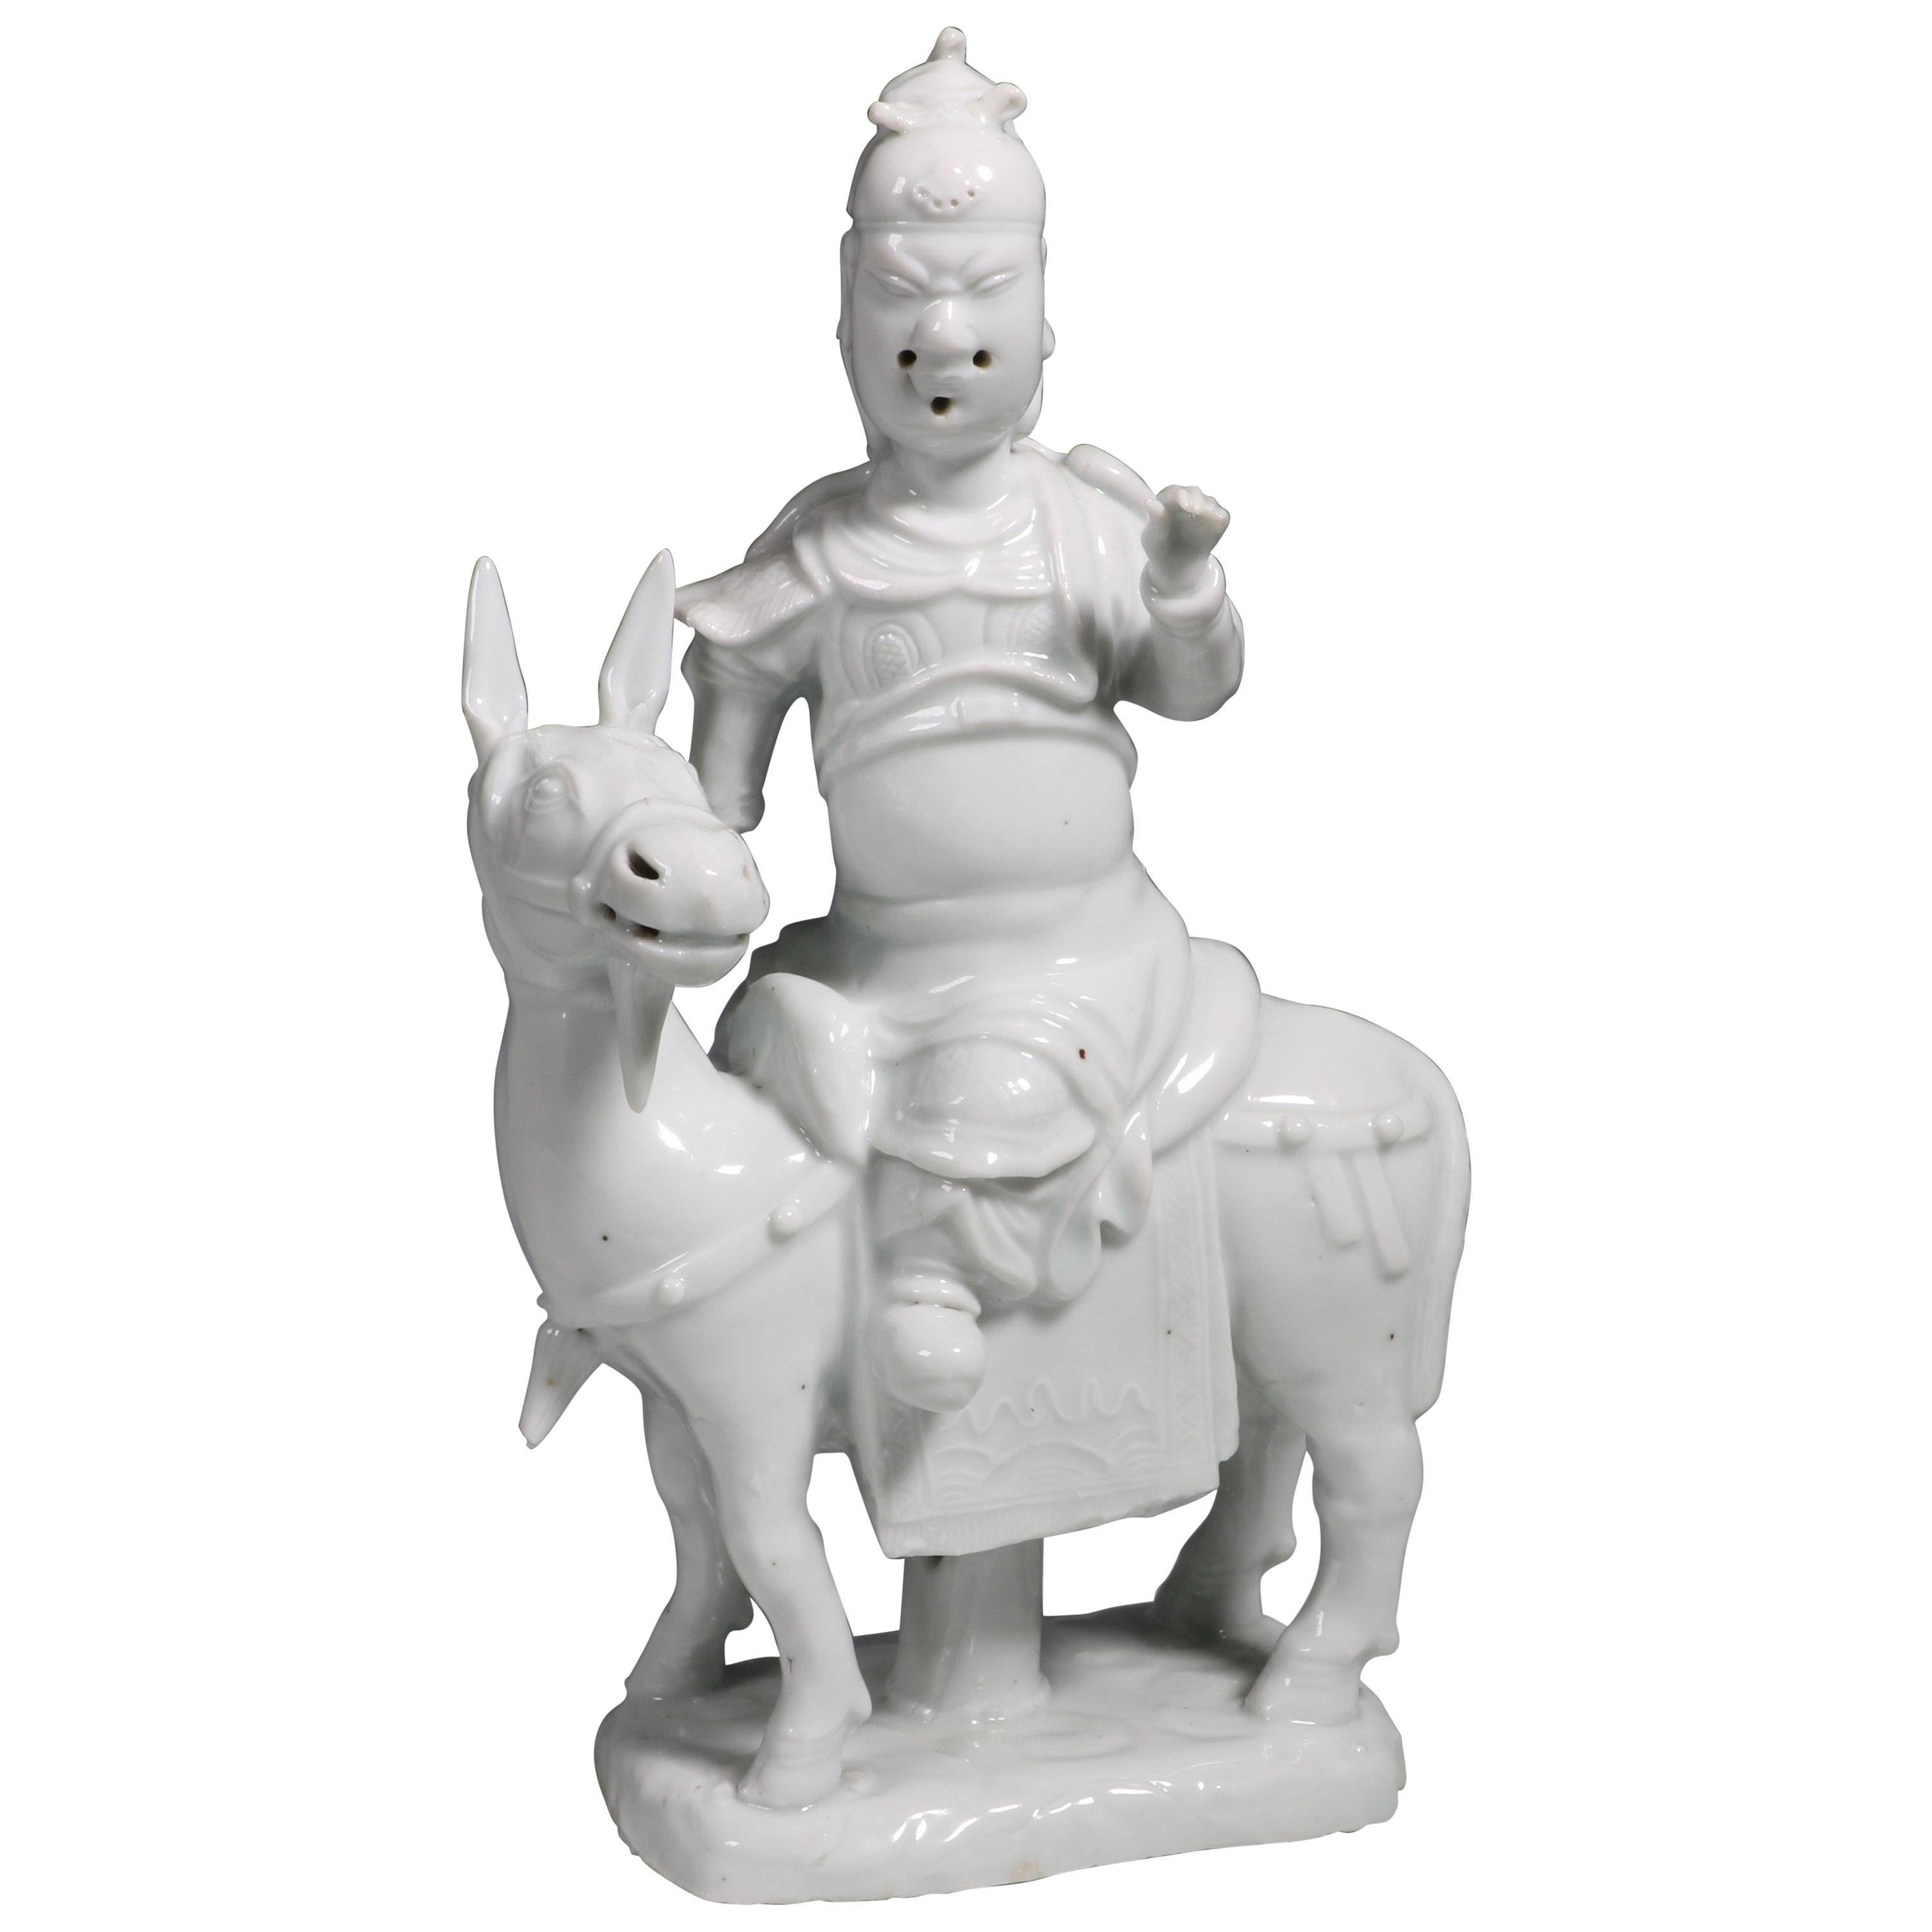 Chinese Porcelain Blanc de Chine Figure of Guandi Kangxi, Late 17th Century For Sale